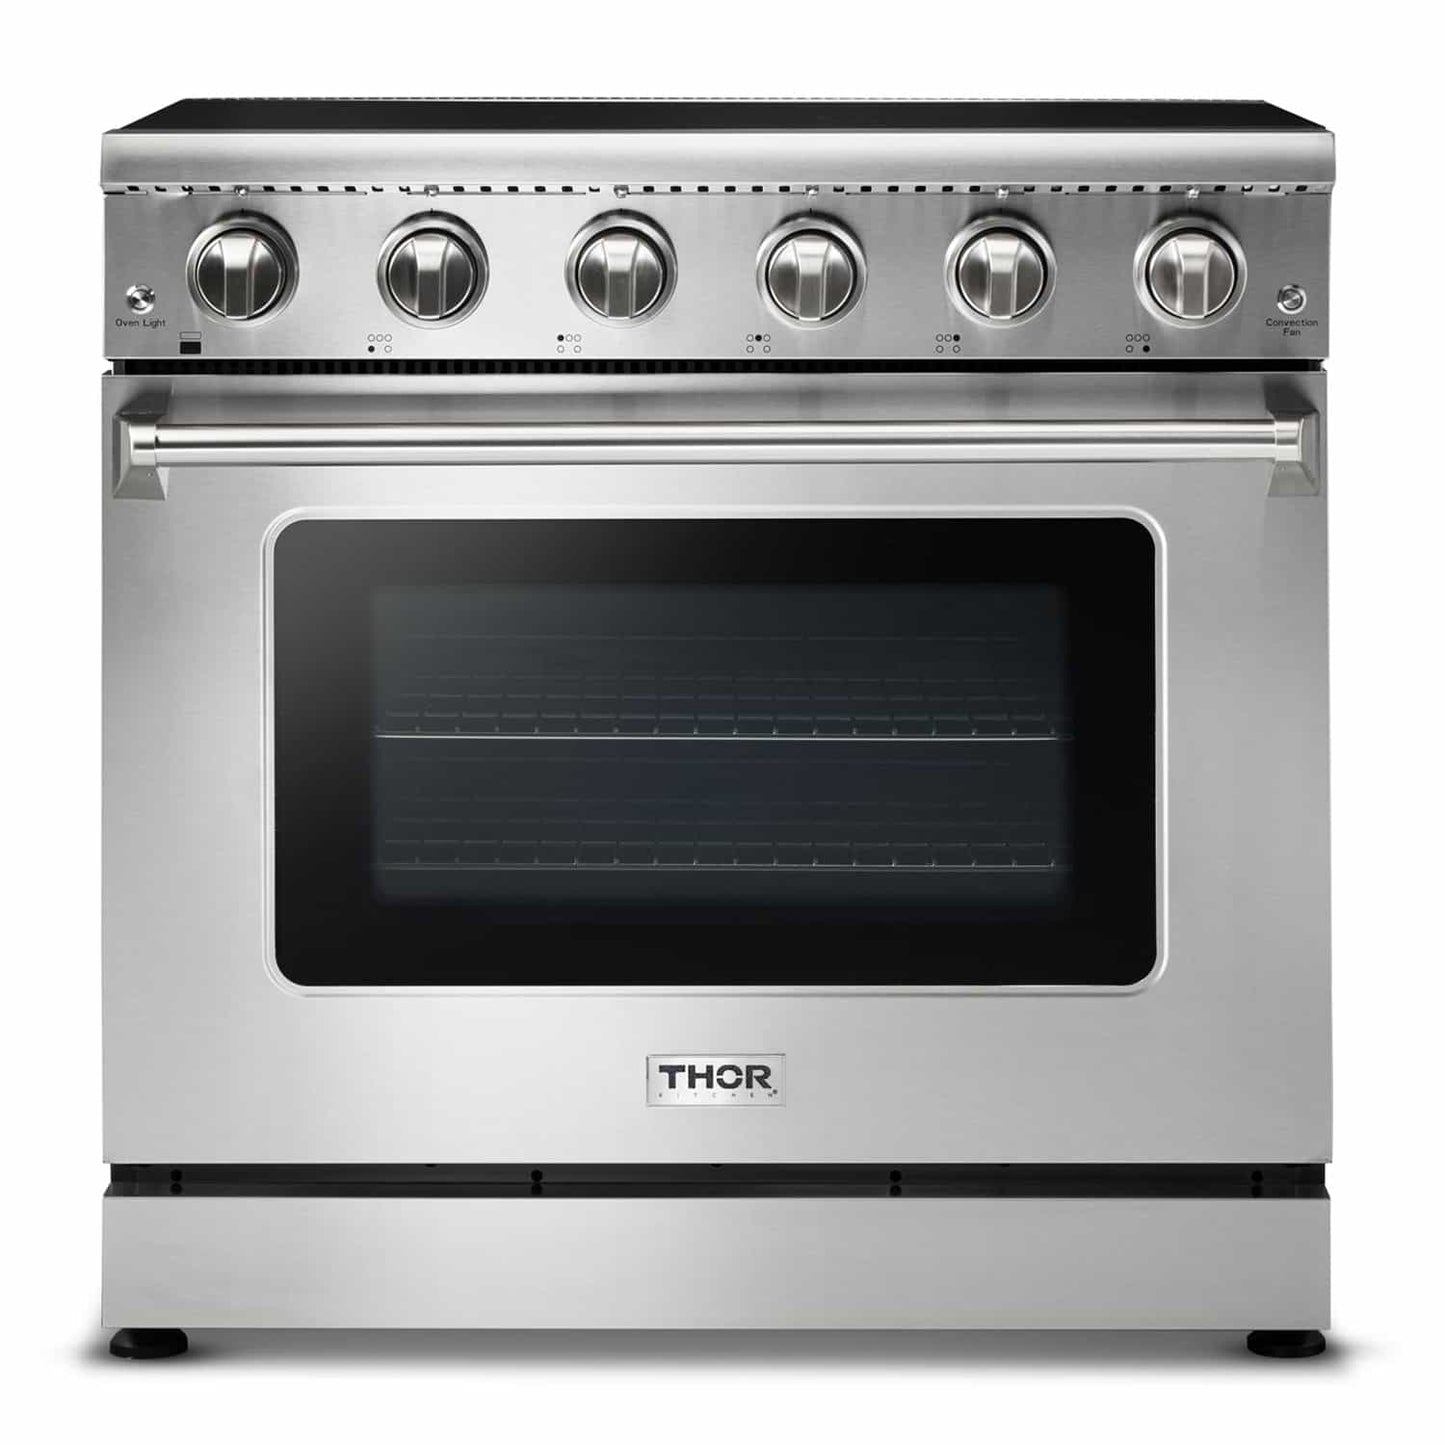 Thor Kitchen 4-Piece Appliance Package - 36-Inch Electric Range, Refrigerator with Water Dispenser, Dishwasher, & Microwave Drawer in Stainless Steel